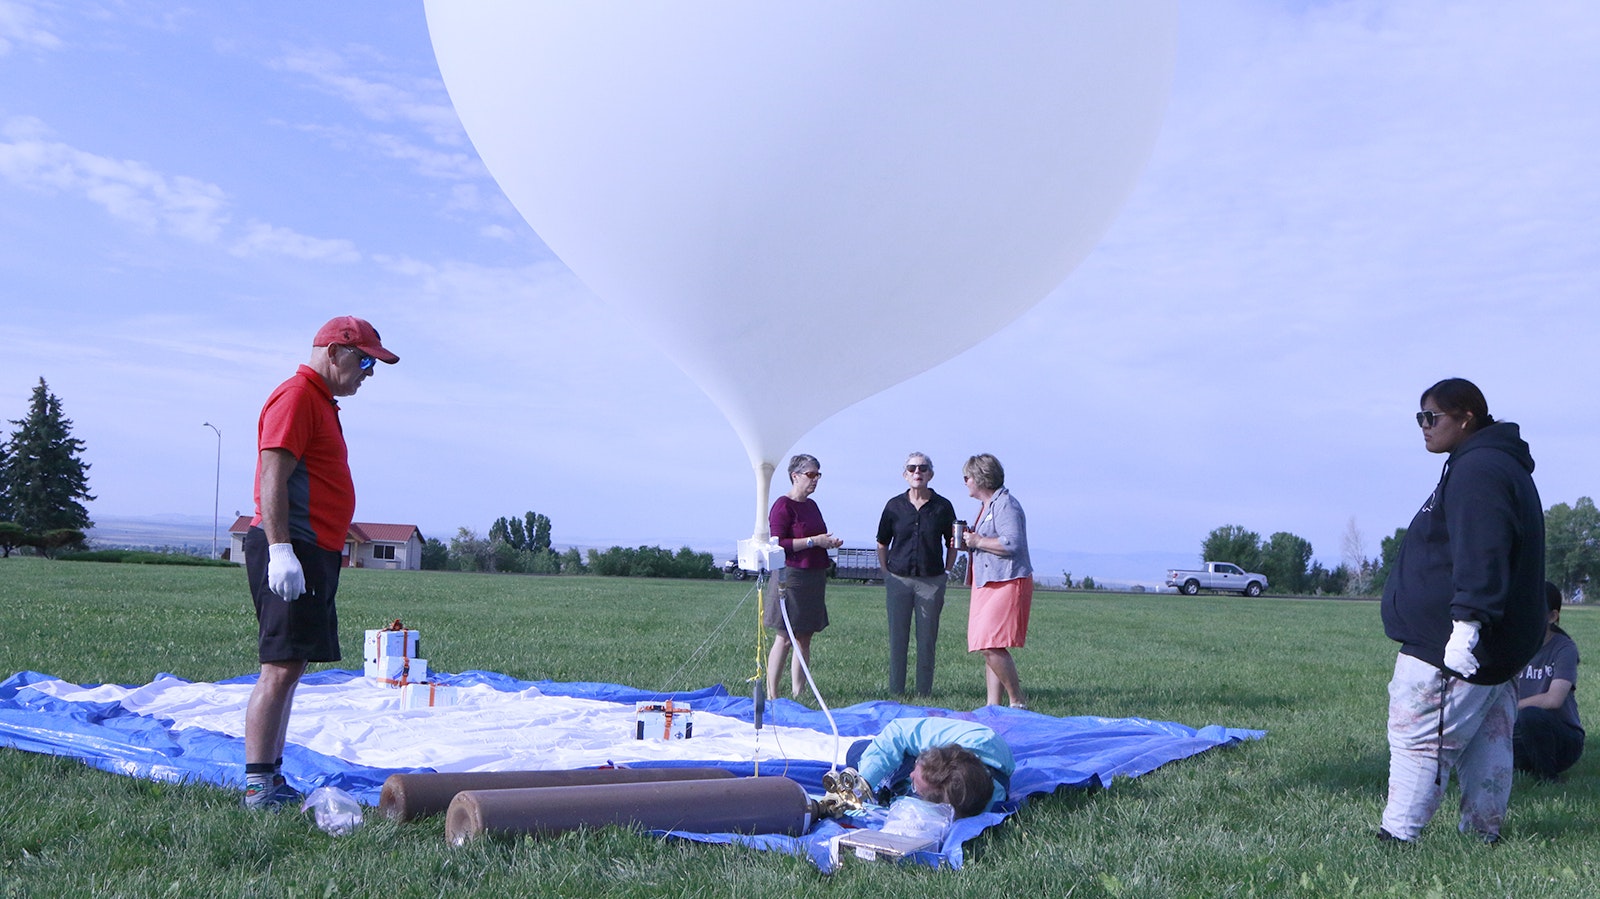 A high-altitude balloon carrying research technology will be launched 17 miles into the sky Saturday by a team from Central Wyoming College to help gather data for a NASA eclipse research project.